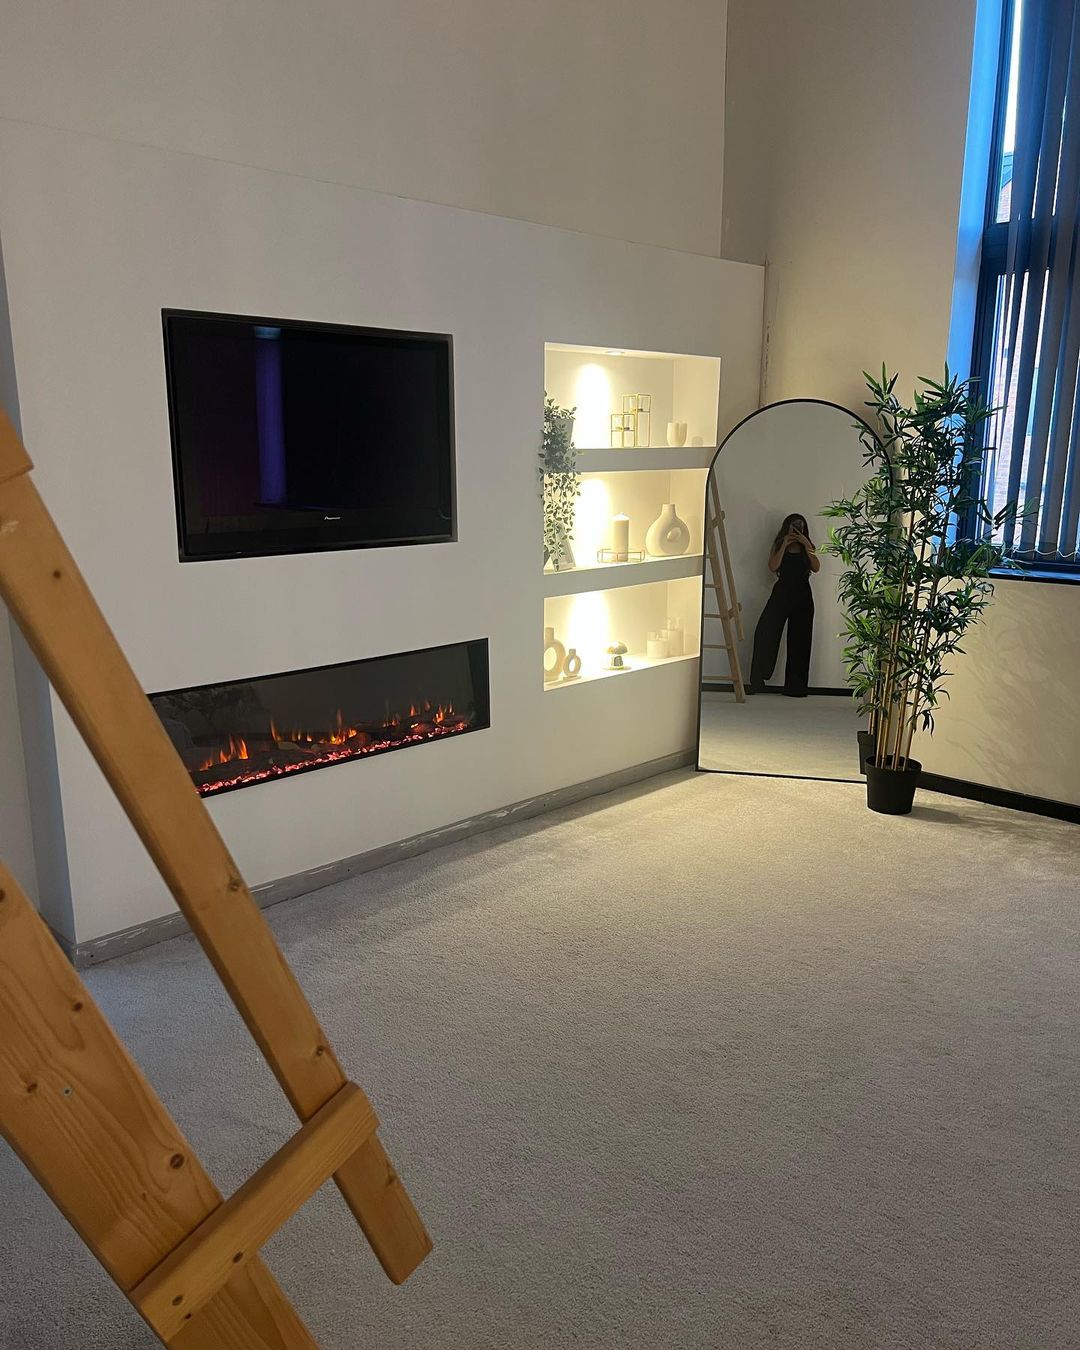 Geordie Shore star Chloe Ferry shows off incredible new lounge at £1m mansion with fireplace and flat screen TV